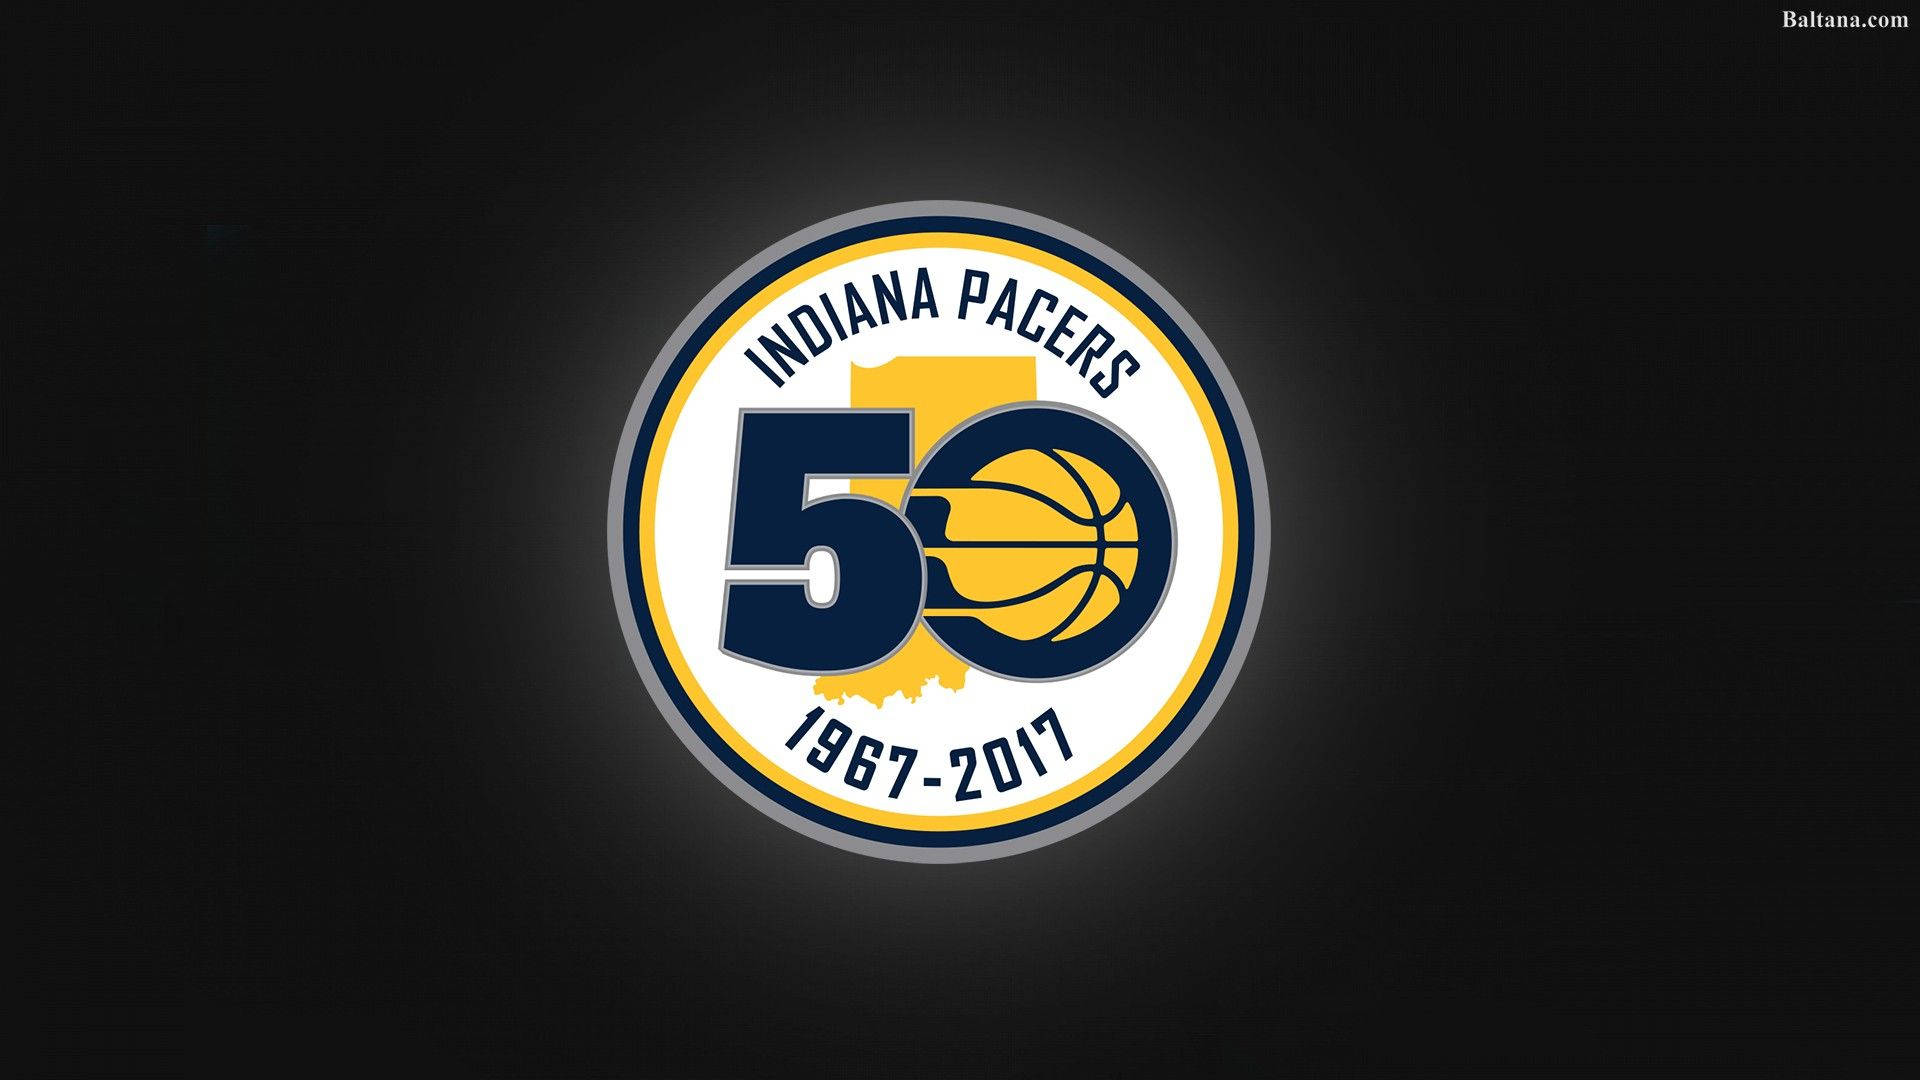 Indiana Pacers Fiftieth Anniversary Logo Wallpaper